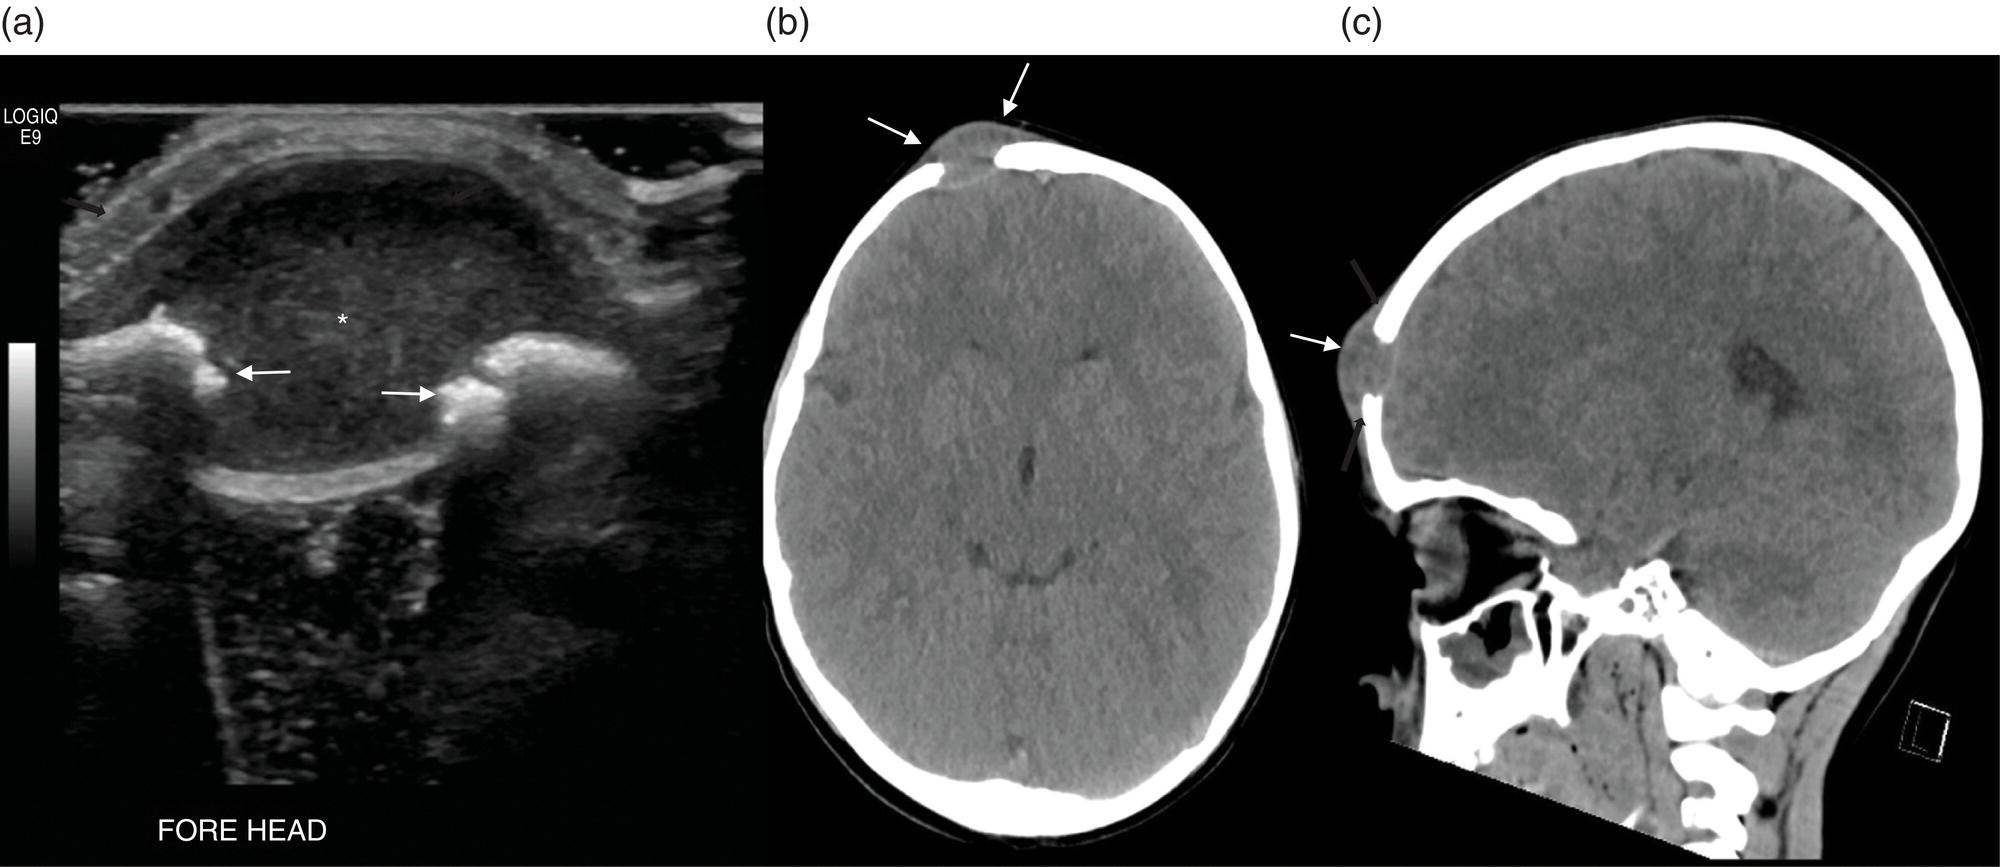 Schematic illustration of (a) 5-year-old male with right forehead swelling. (b) Axial CT image of the brain shows the frontal bone lesion with convex border (white arrows) filling the defect. (c) Sagittal CT of the brain demonstrating frontal bone lesion with mass (white arrow) filling the defect.